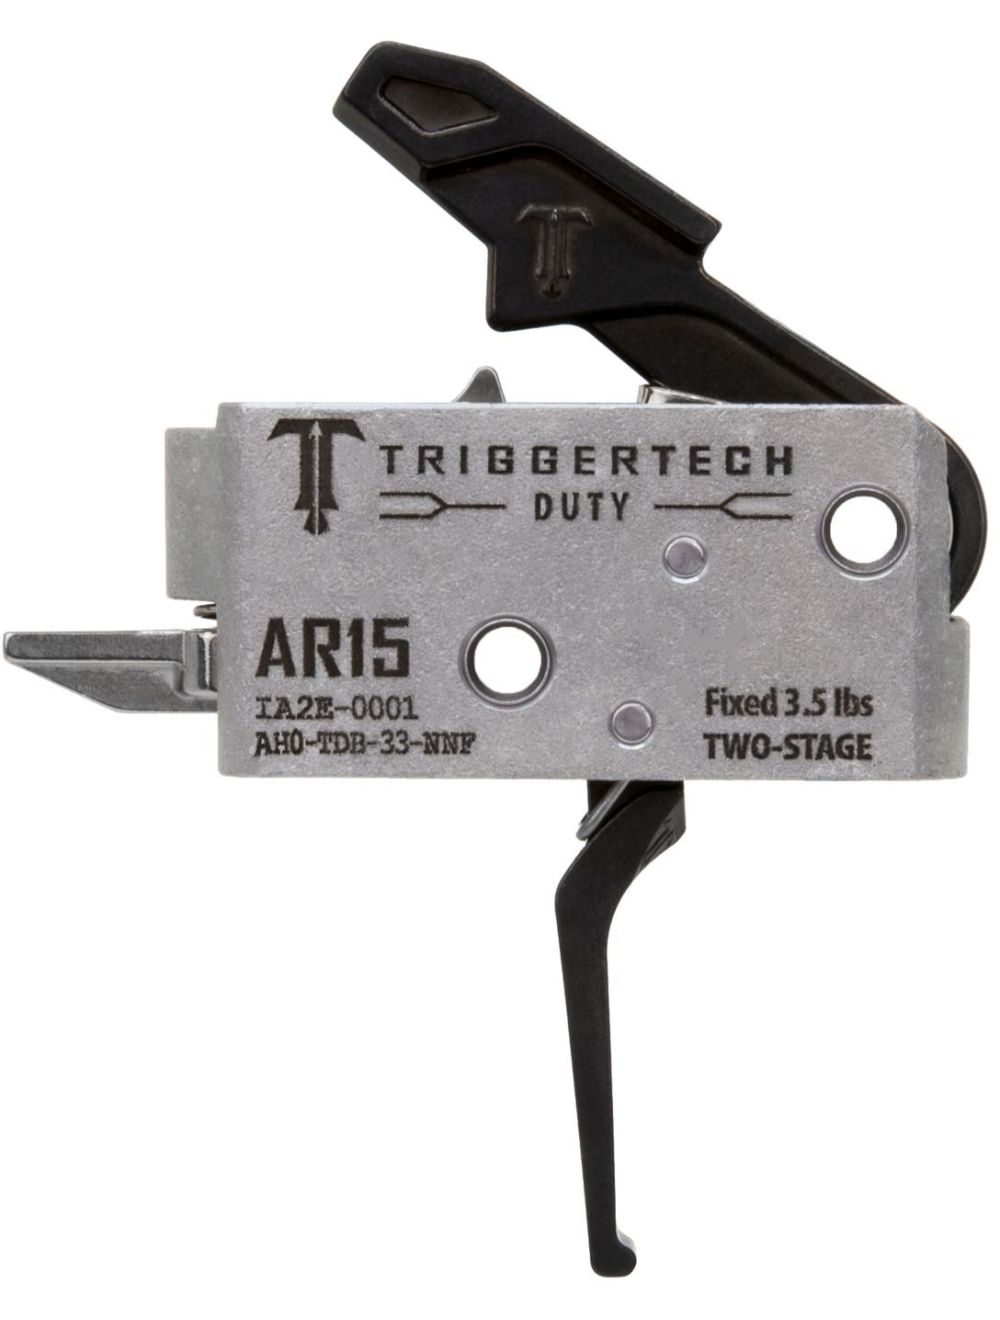 AR15 Two-Stage Trigger